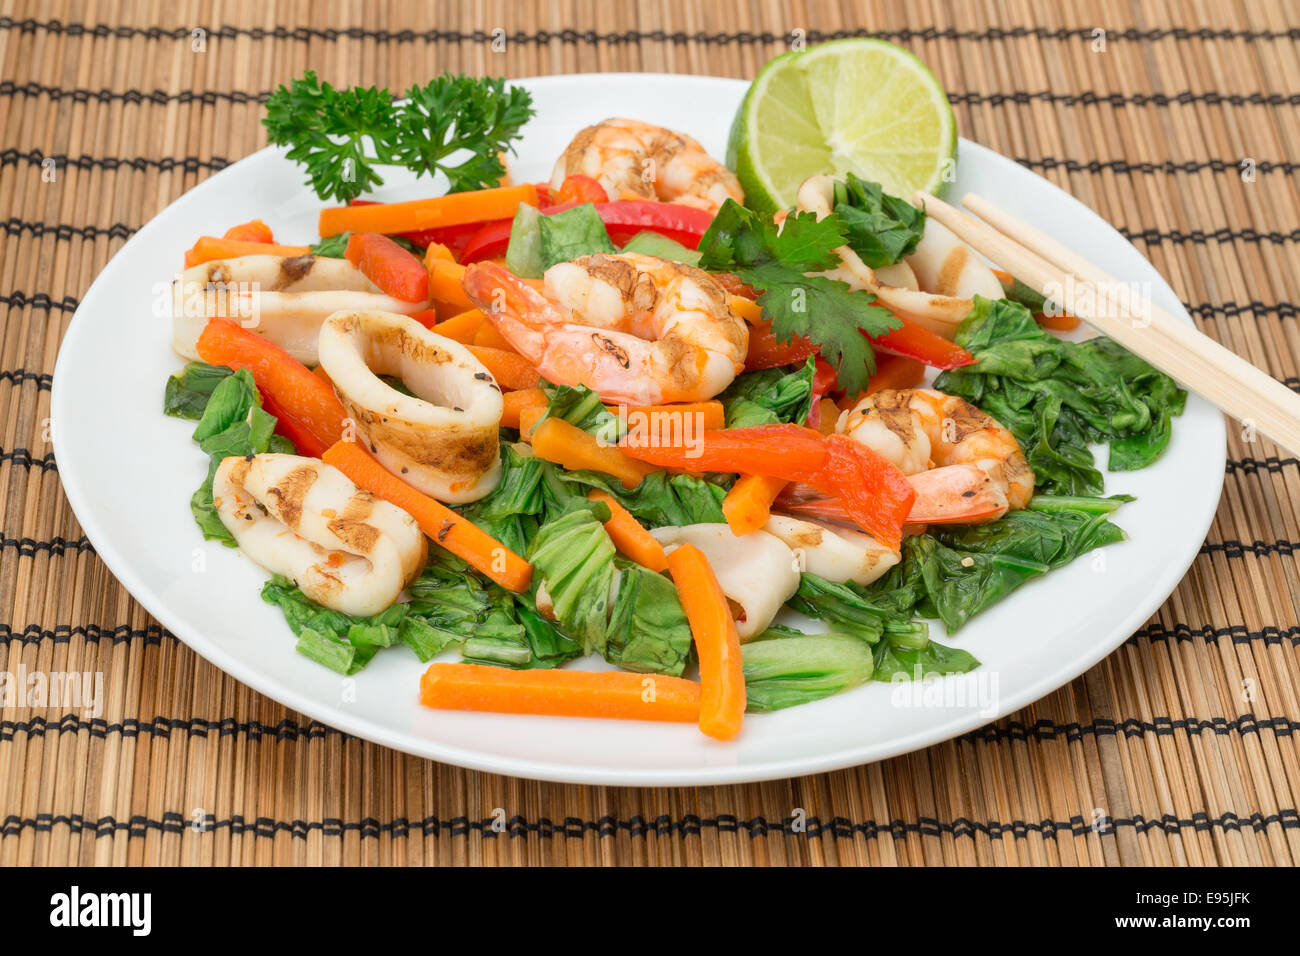 Vietnamese cuisine - plate of chargrilled Calamari and King Prawns with strips of carrot, red bell peppers, and pak choi Stock Photo